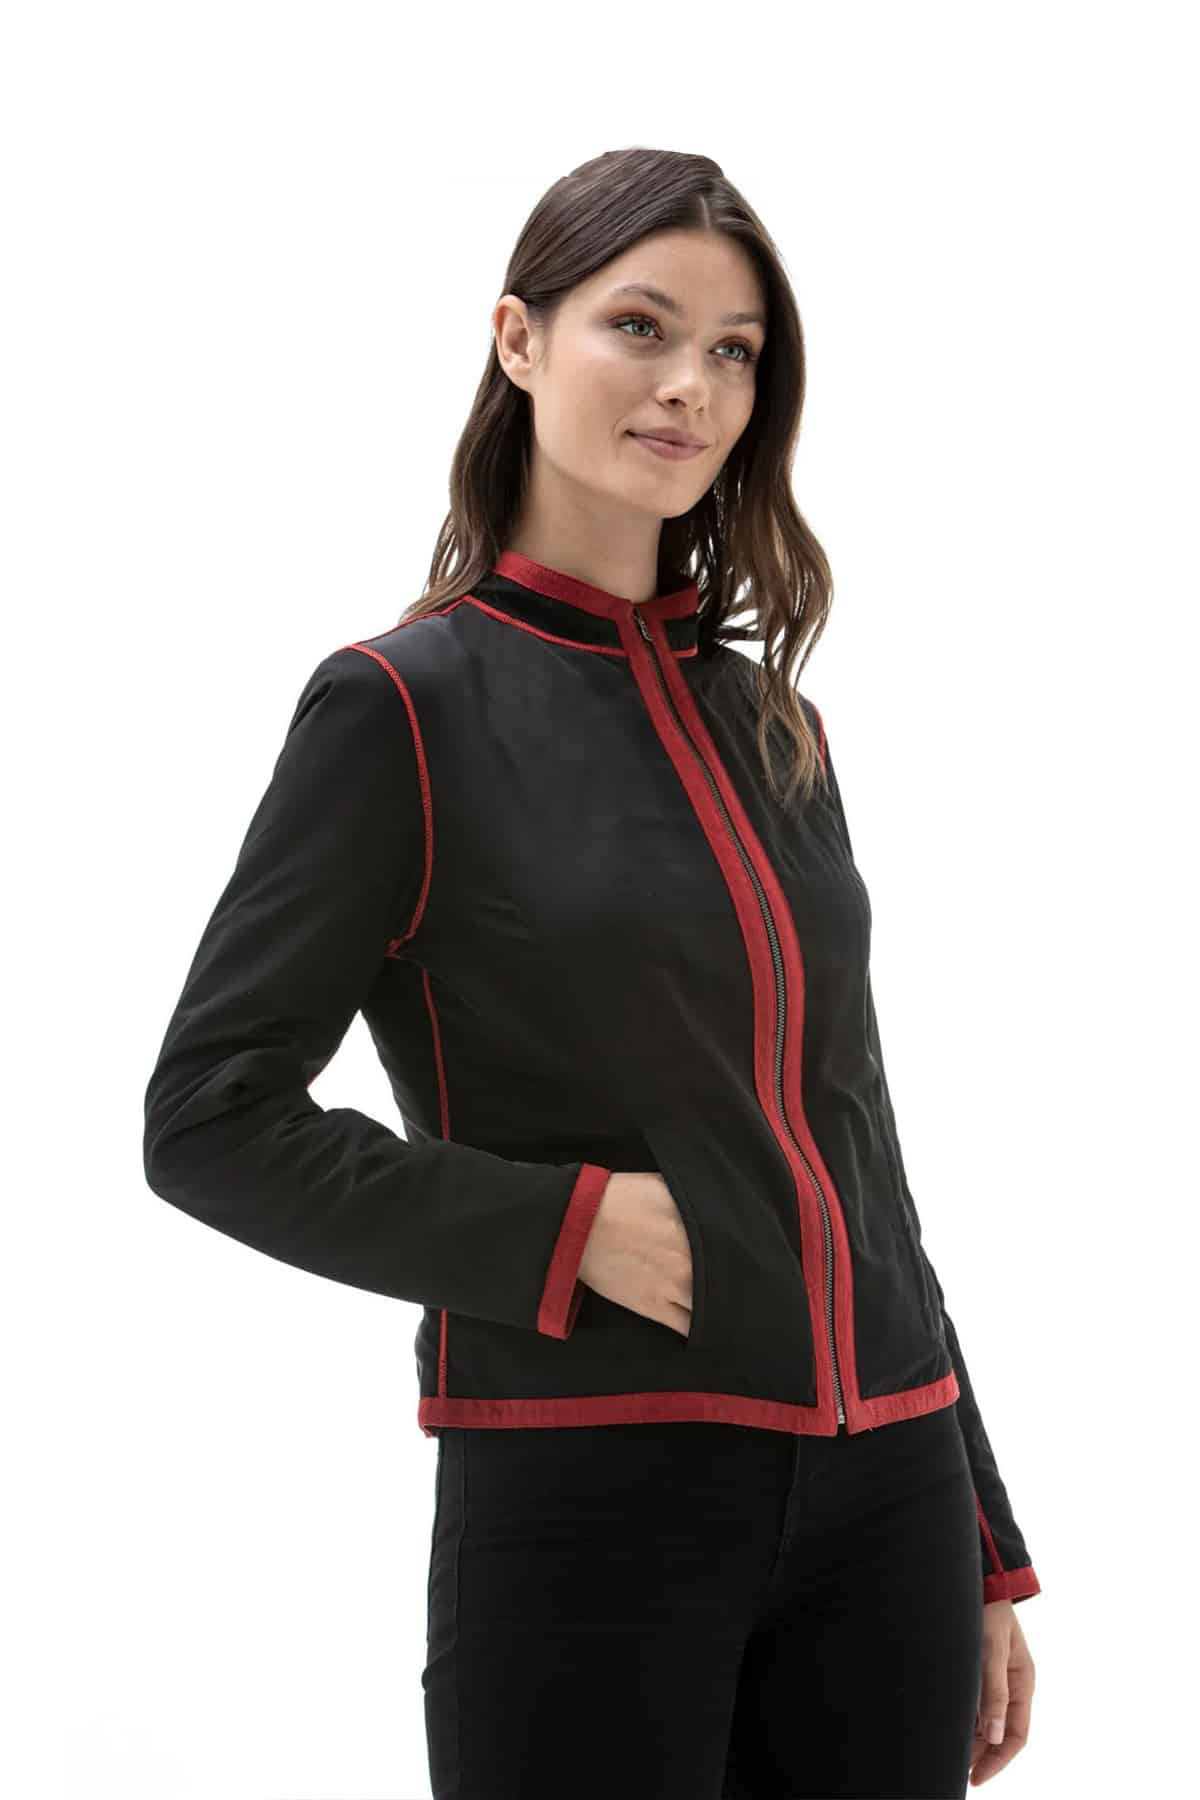 Women's 100% Real Red & Black Leather Reversible Fashion Jacket